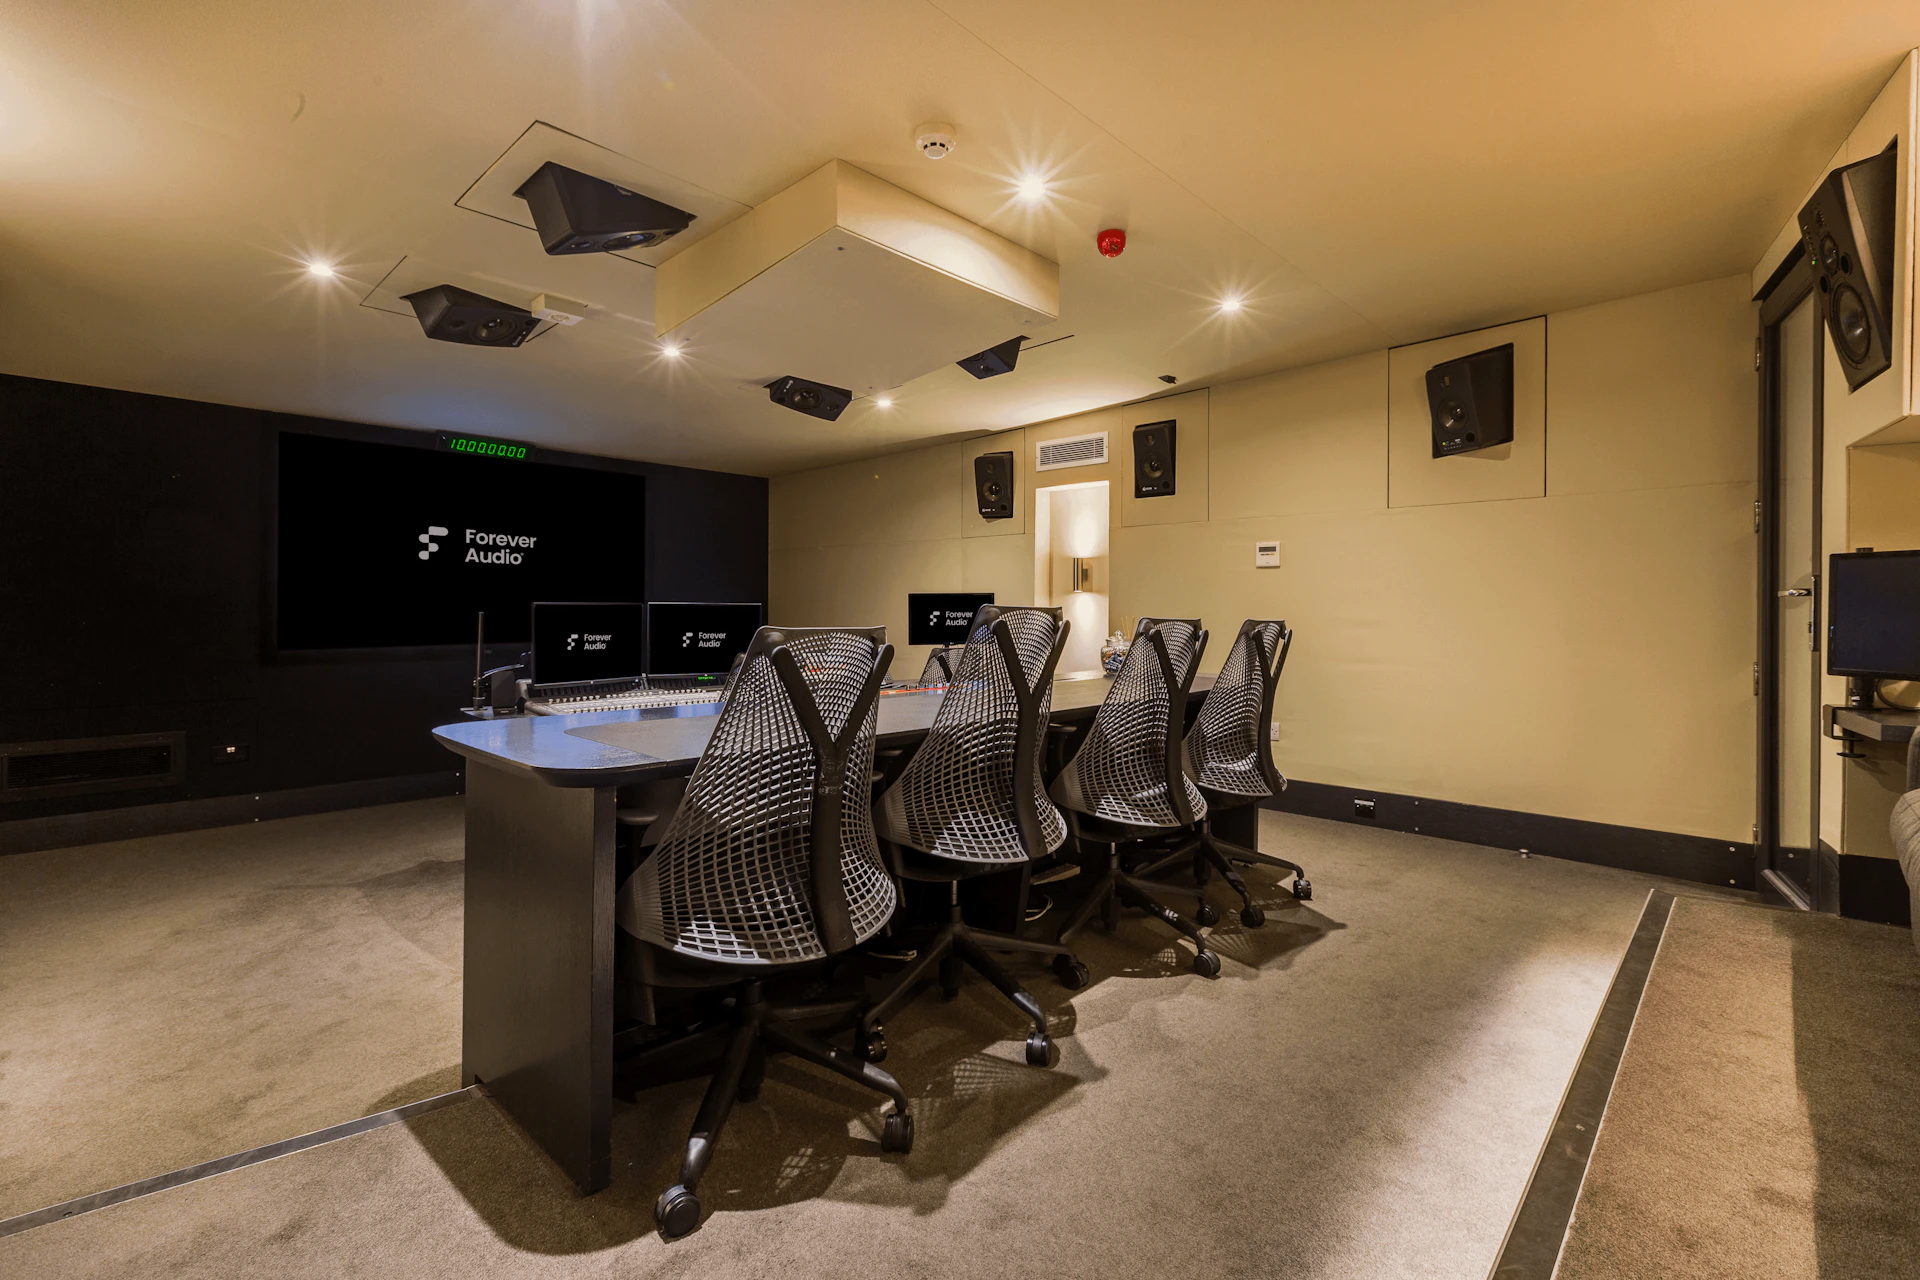 Cinema studio Dolby Atmos speakers and projector